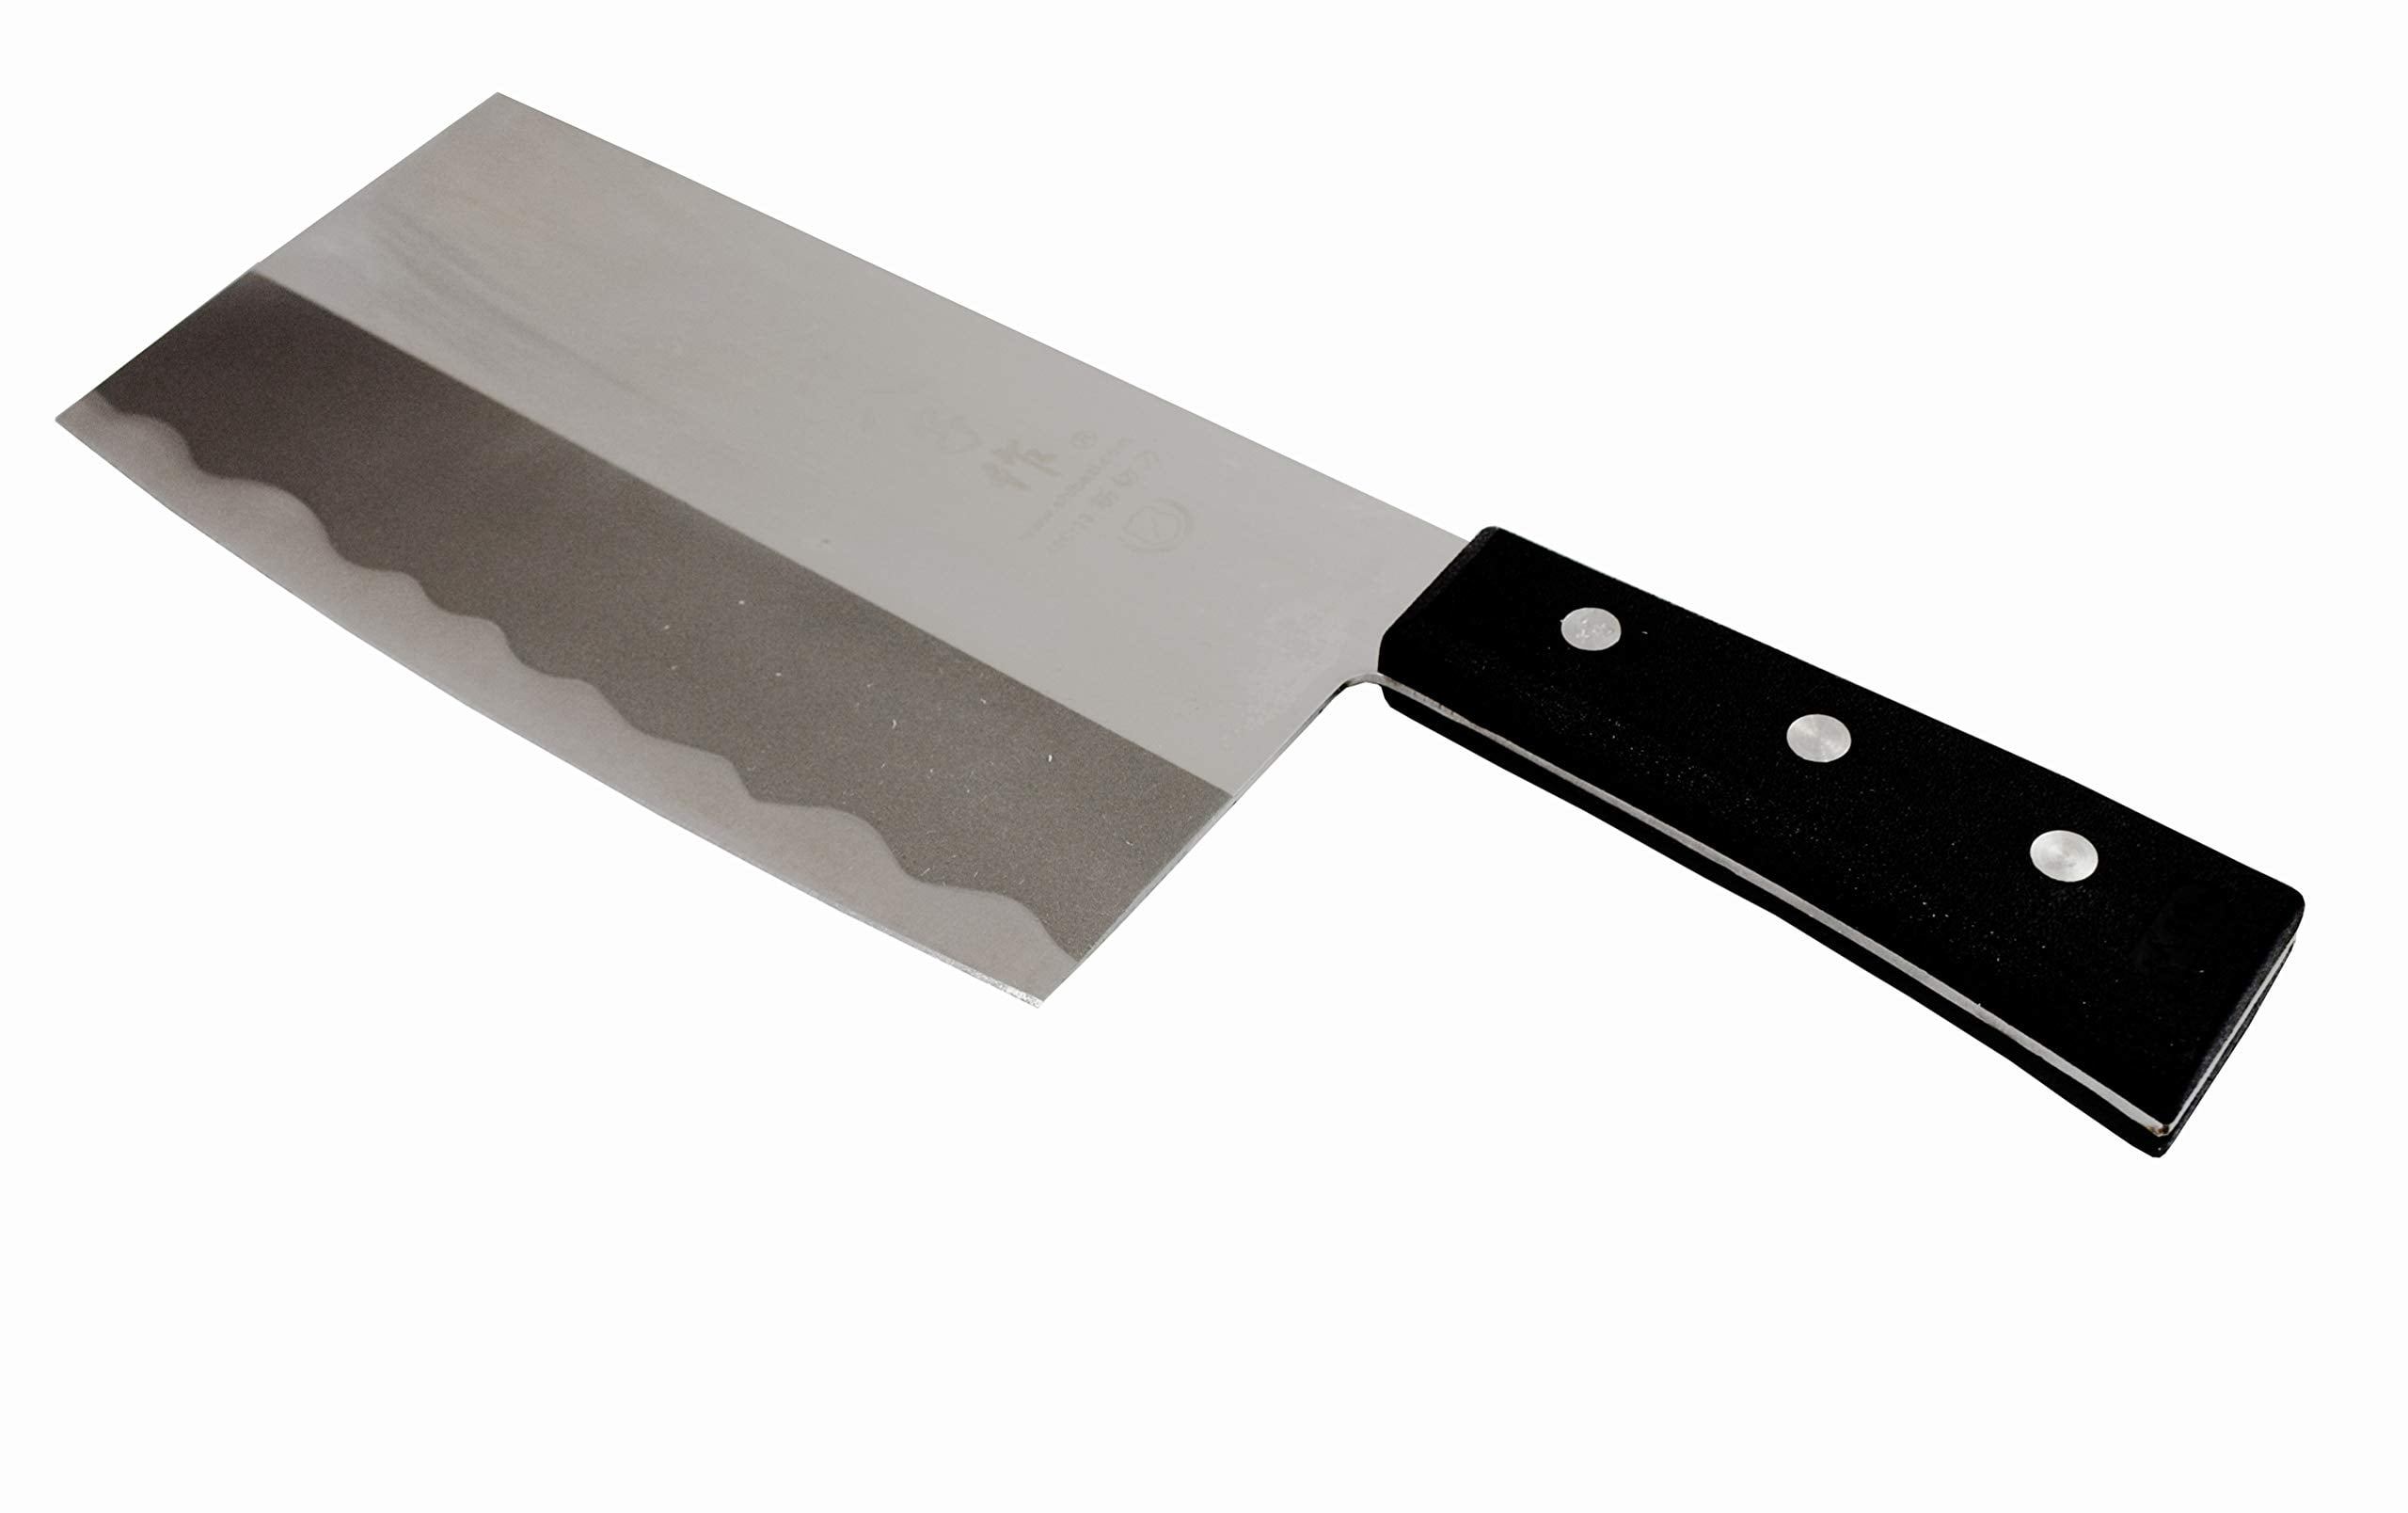 Sunrise Stainless Steel Veggie / Meat/ Poultry Cleaver Knife with Black Rubber Handle (7.85L x 3.75 W)